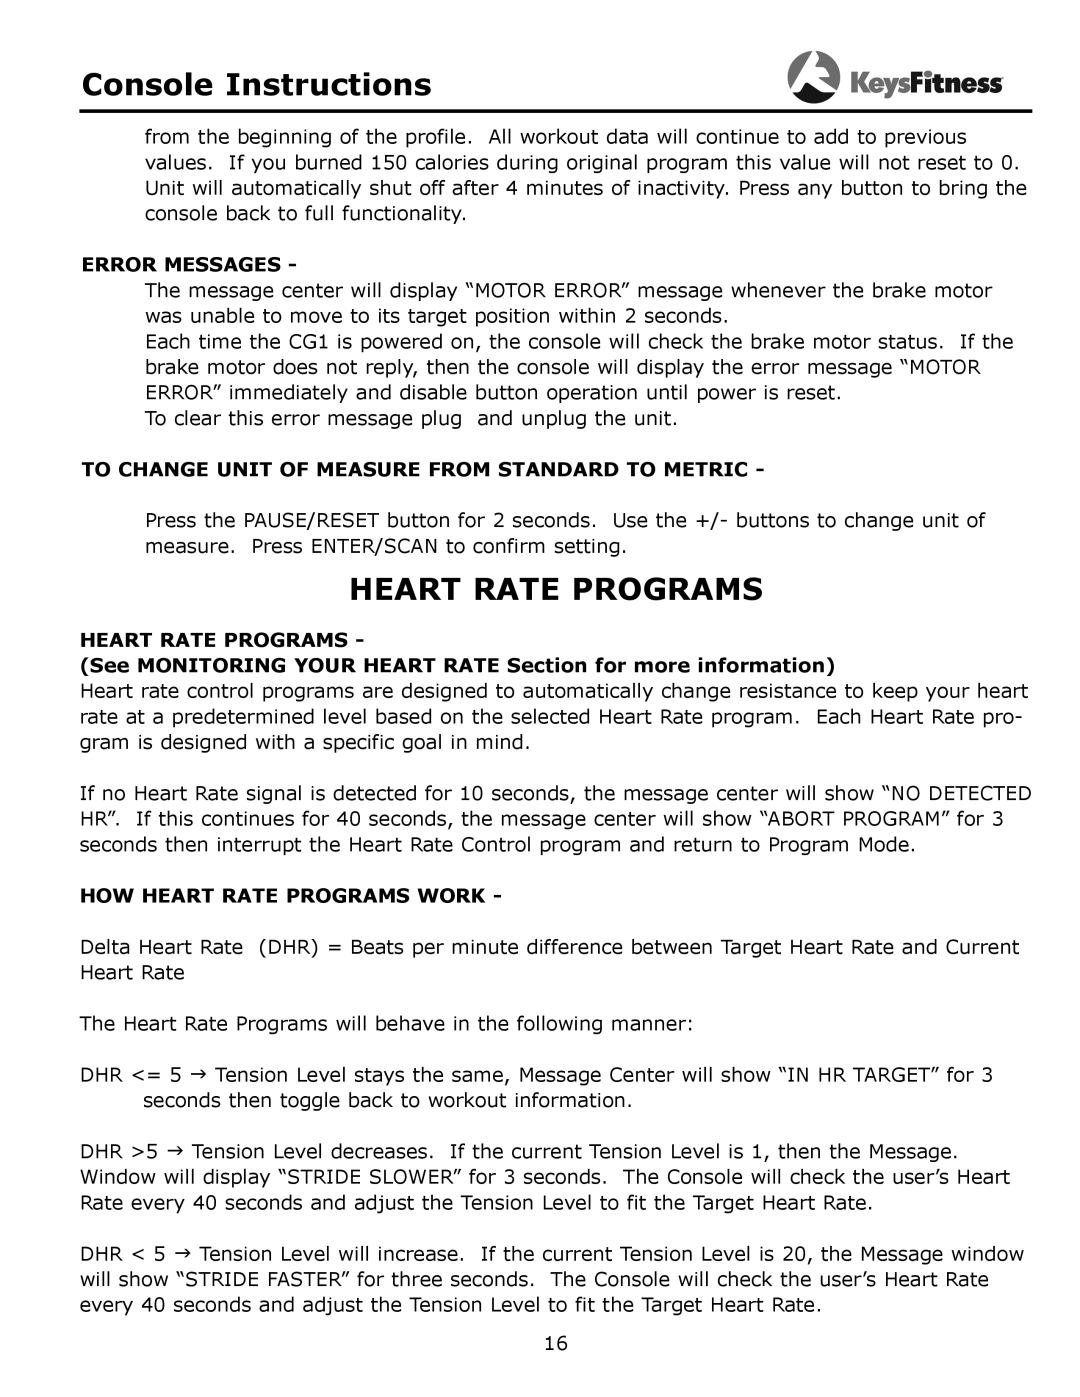 Keys Fitness 315-00106 owner manual Console Instructions, Error Messages, How Heart Rate Programs Work 